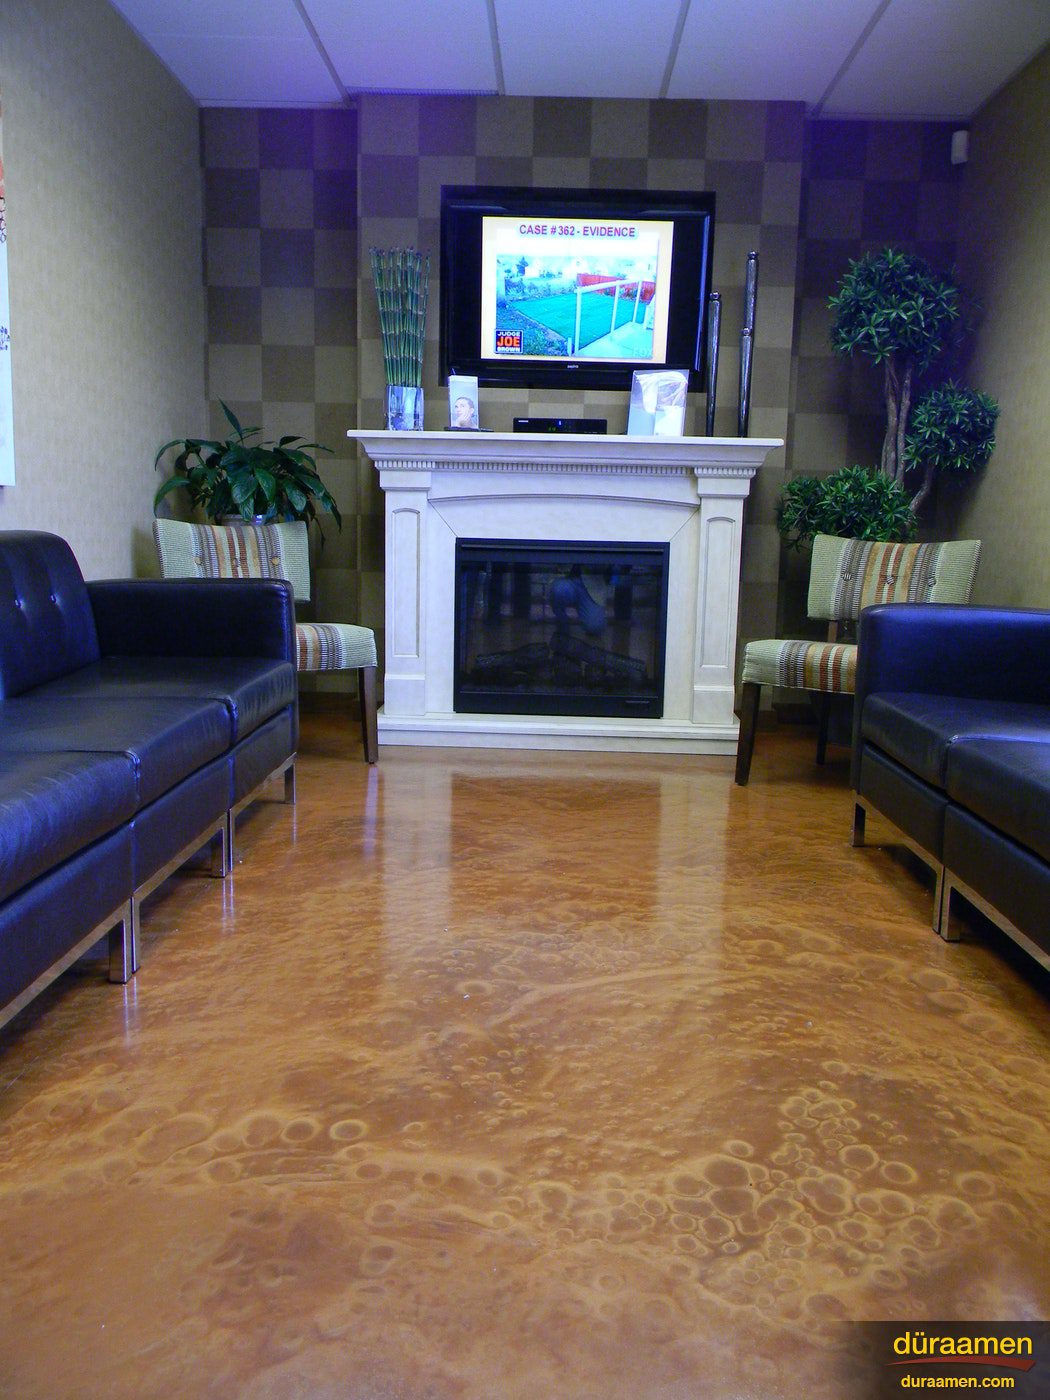 The waiting room looks great with the metallic epoxy flooring system Metallic Epoxy Flooring in a Doctors Office Cleveland OH | Duraamen Engineered Products Inc